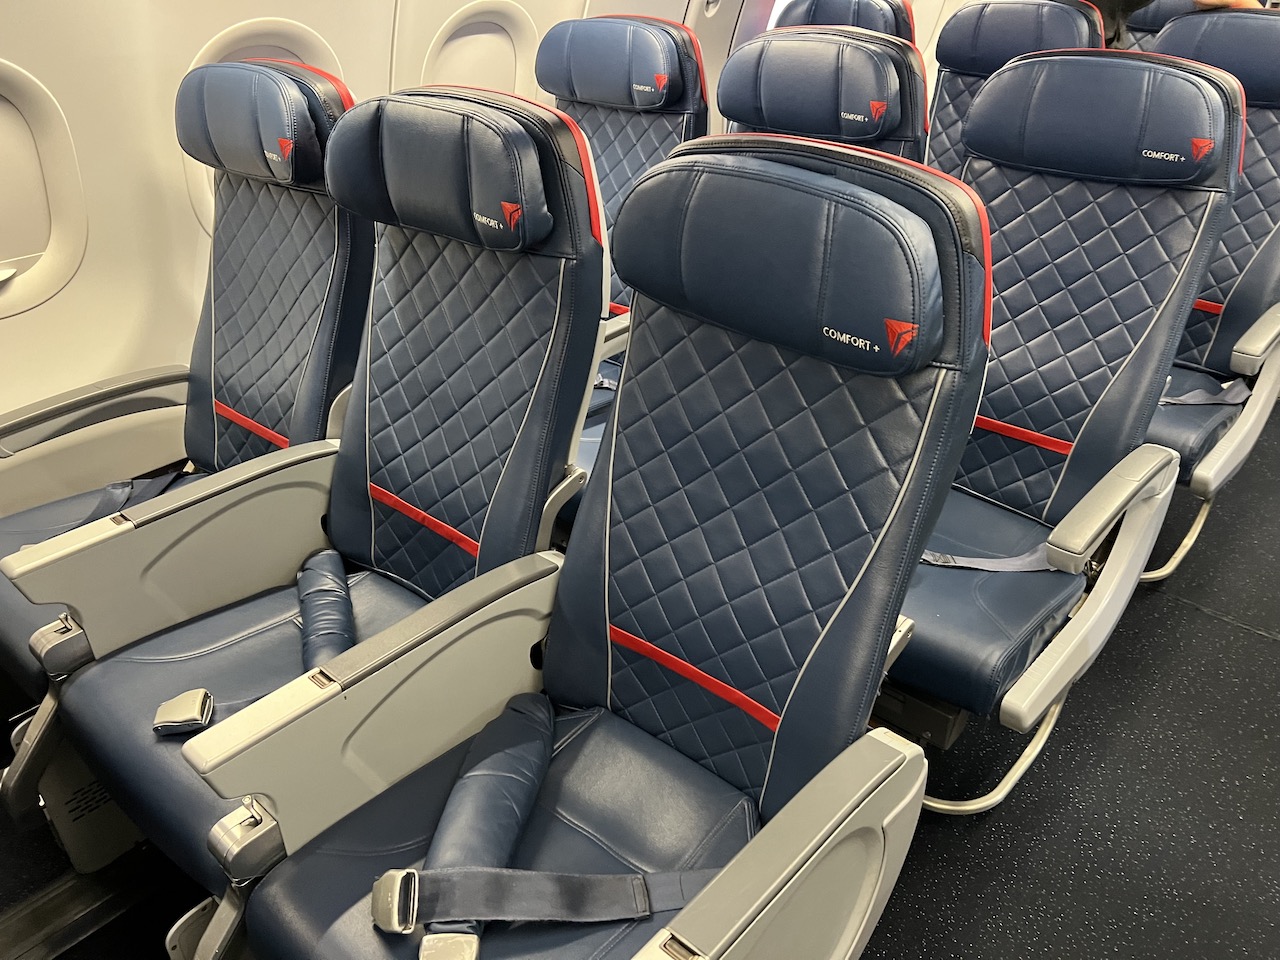 Delta Air Lines Reviews: What to Know Before You Fly